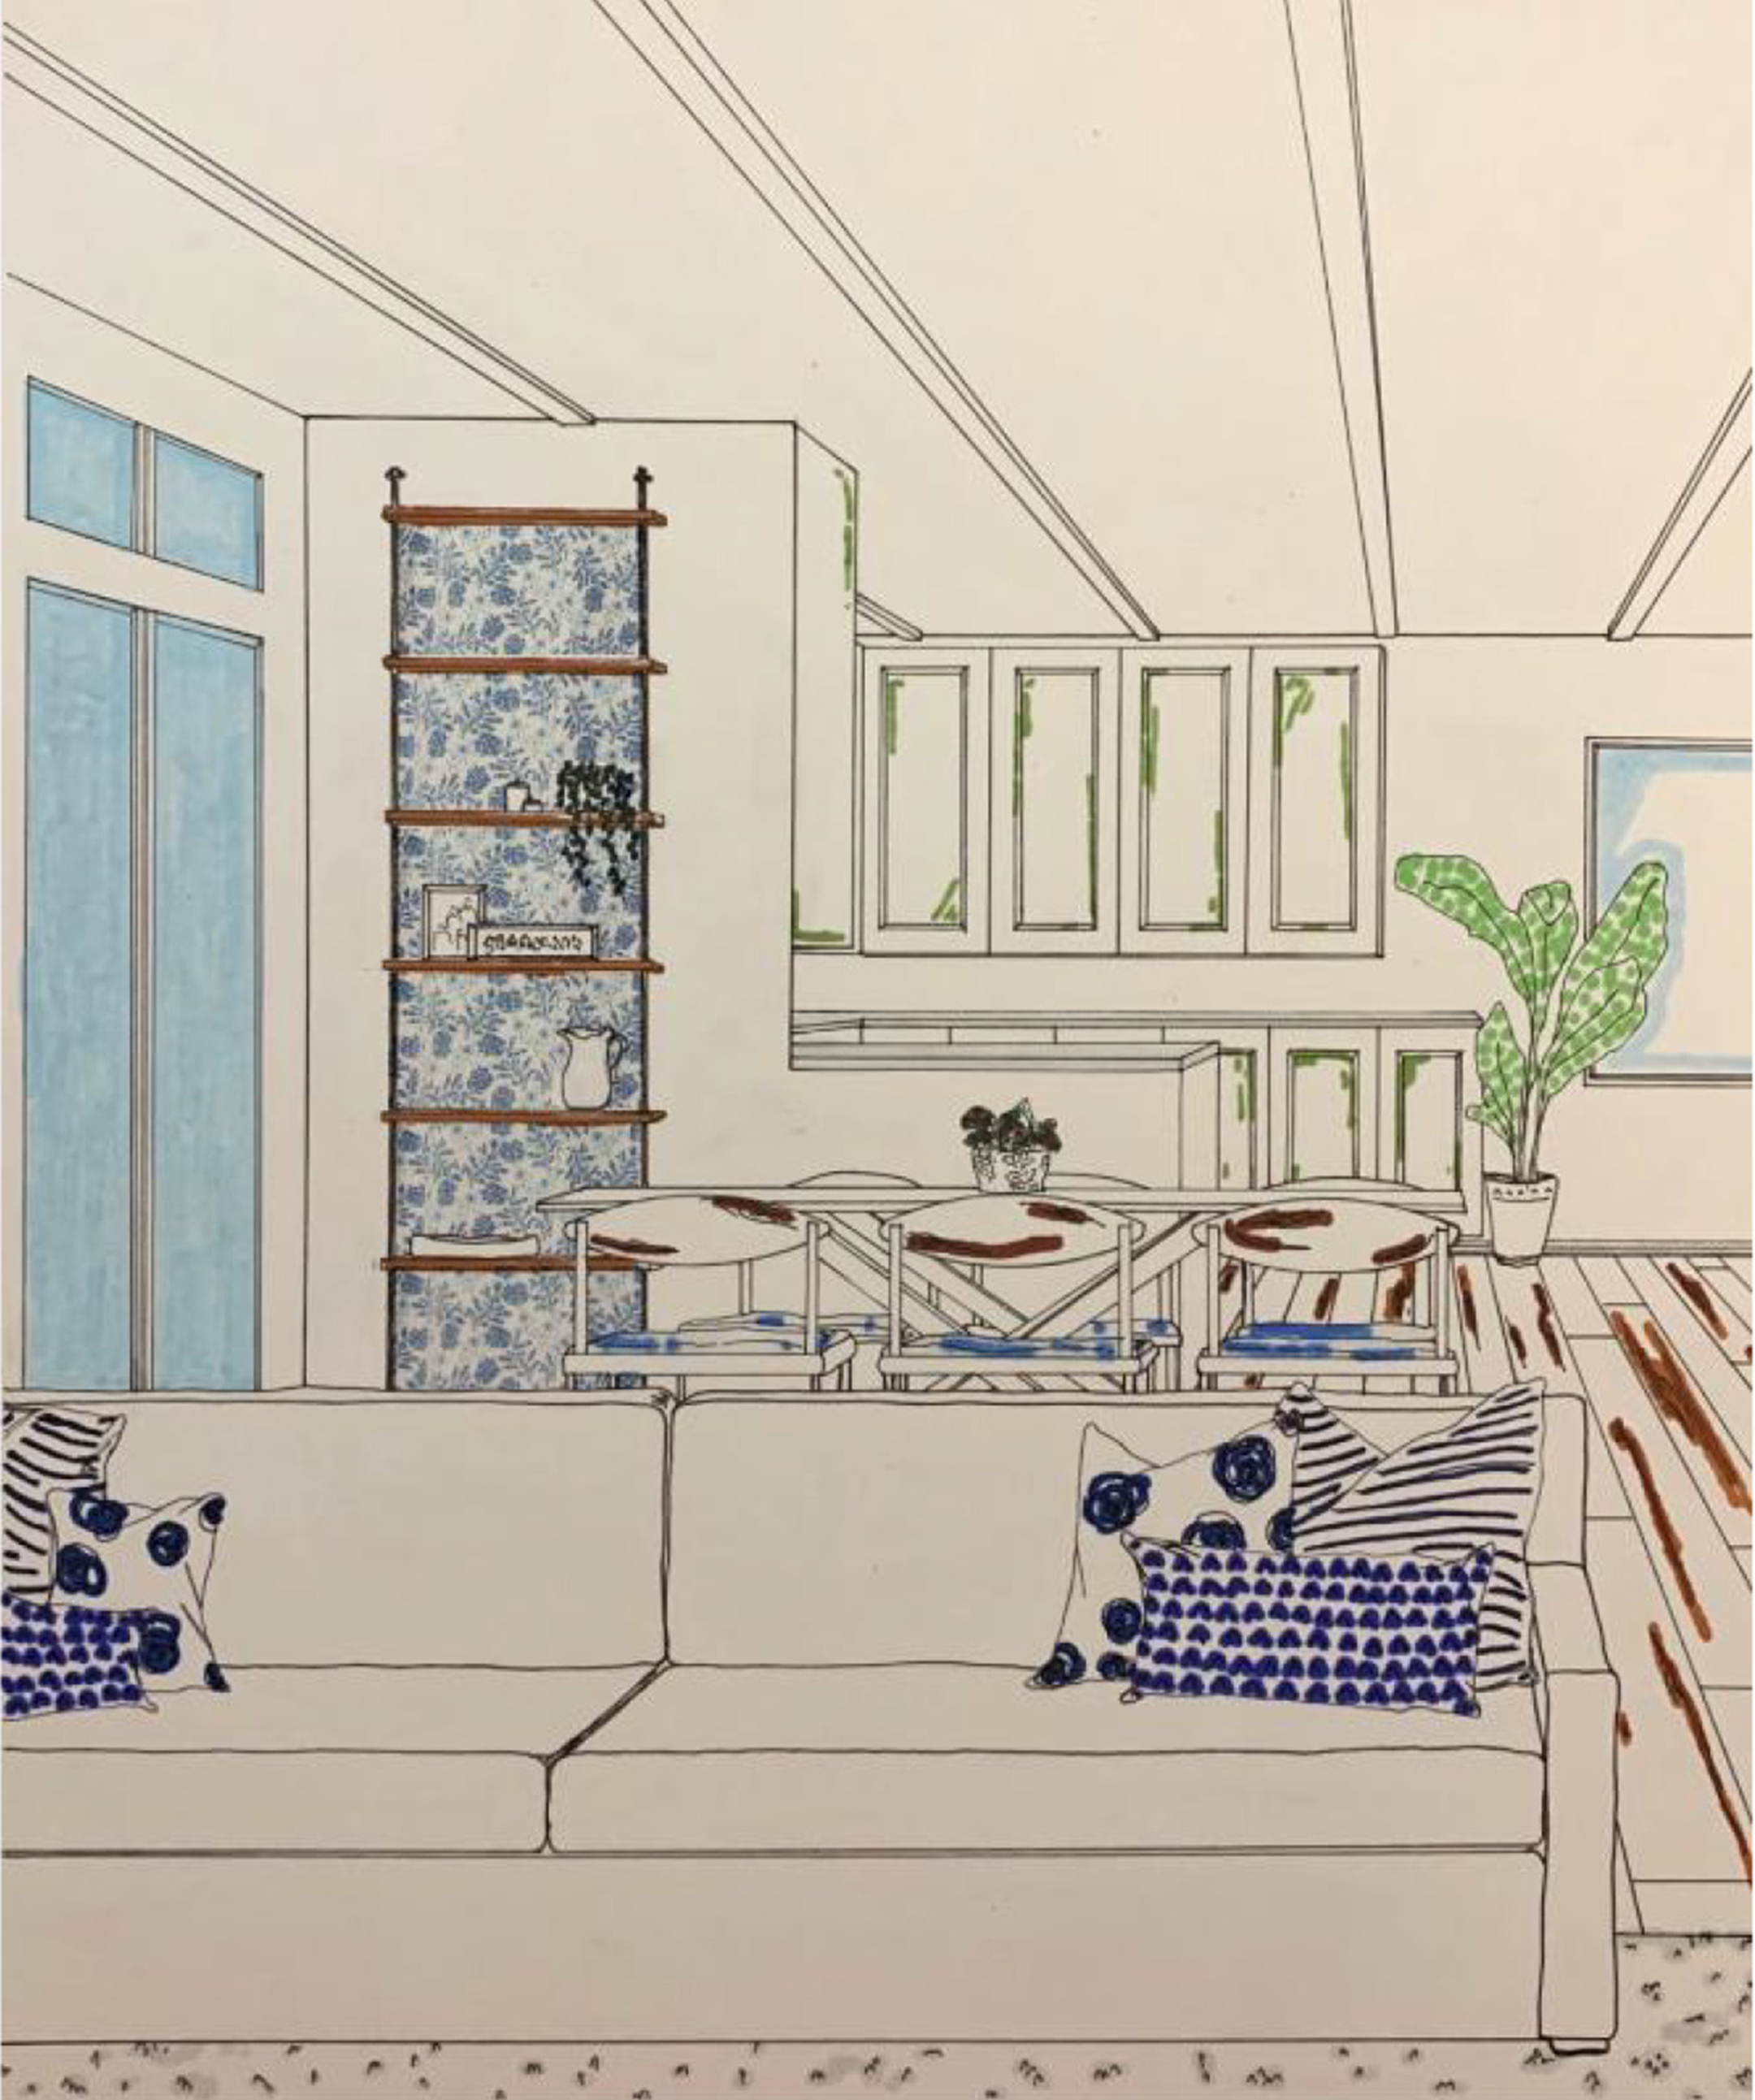 Illustration of a room, mostly all white, except for blue throw pillows and a green plant